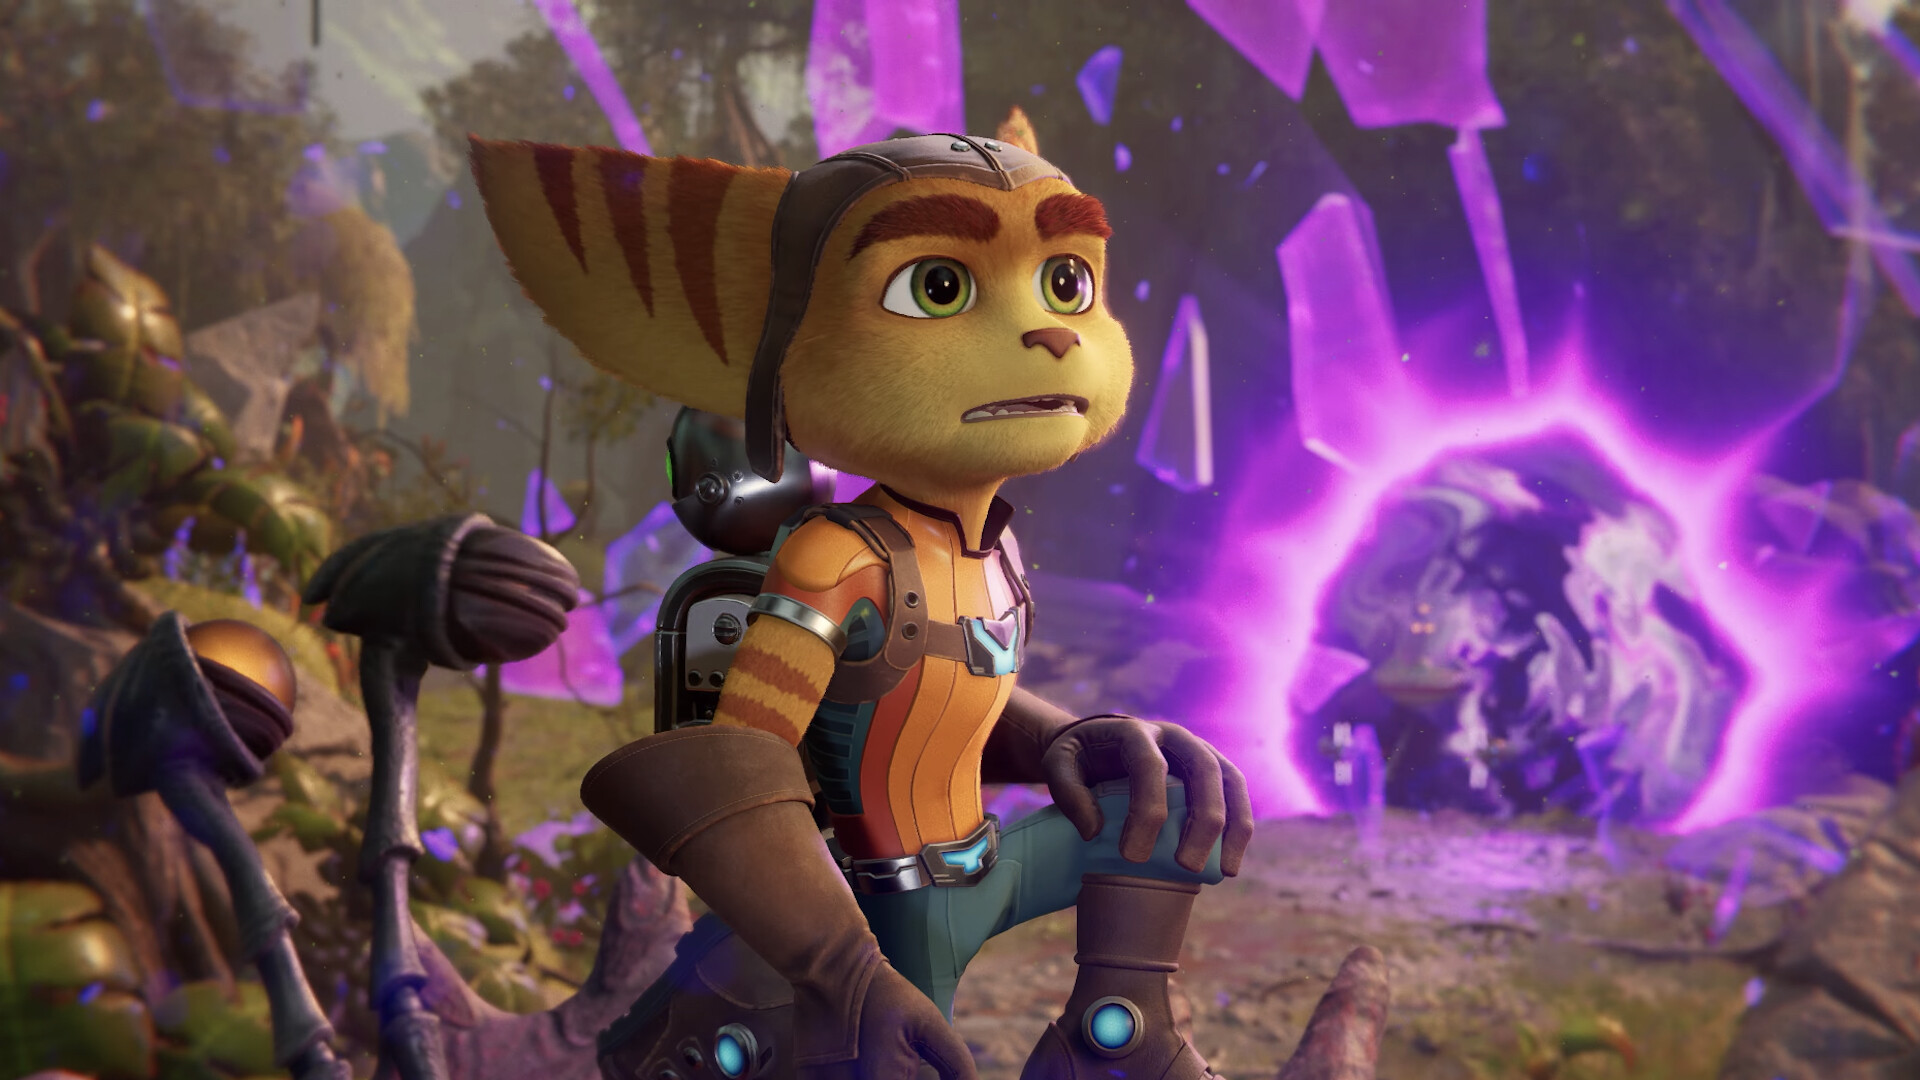 Ratchet and Clank: Rift Apart: Playable character, Travels through the universe, saving it from evil forces that consistently threaten it. 1920x1080 Full HD Background.